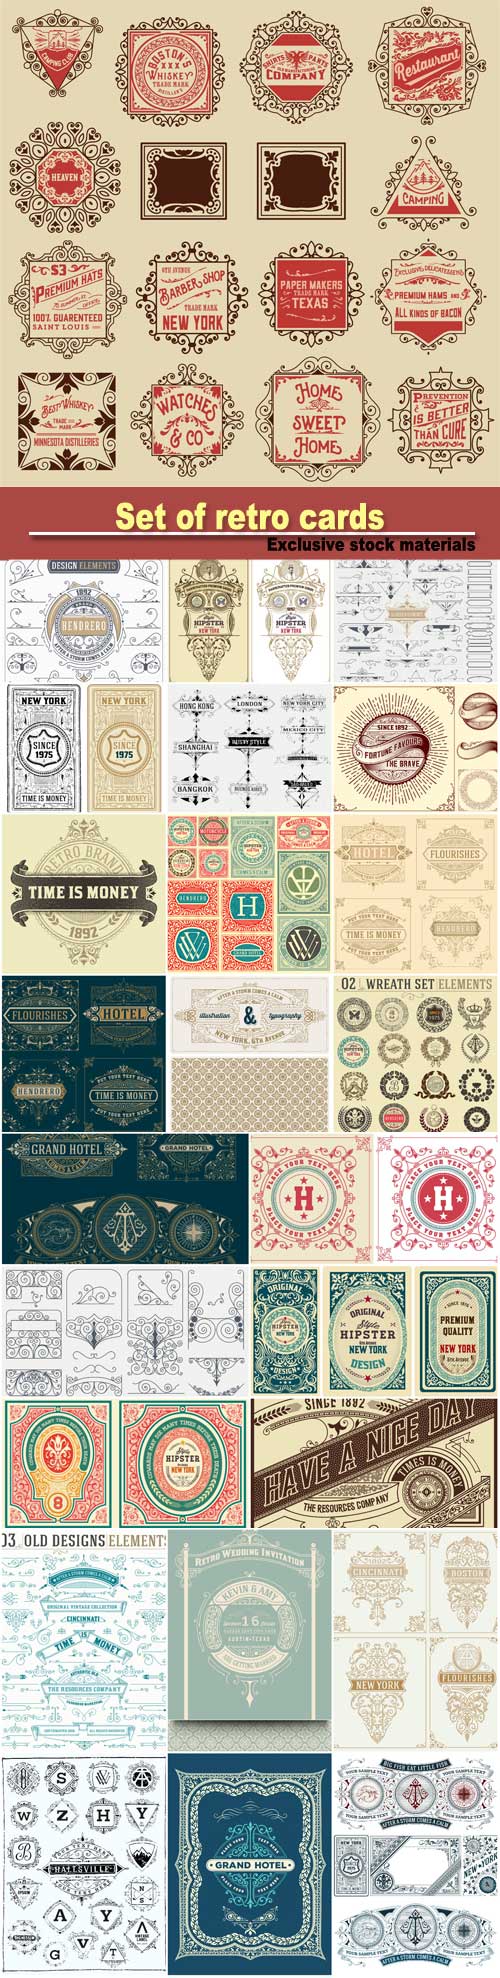 Set of retro cards, labels and design elements